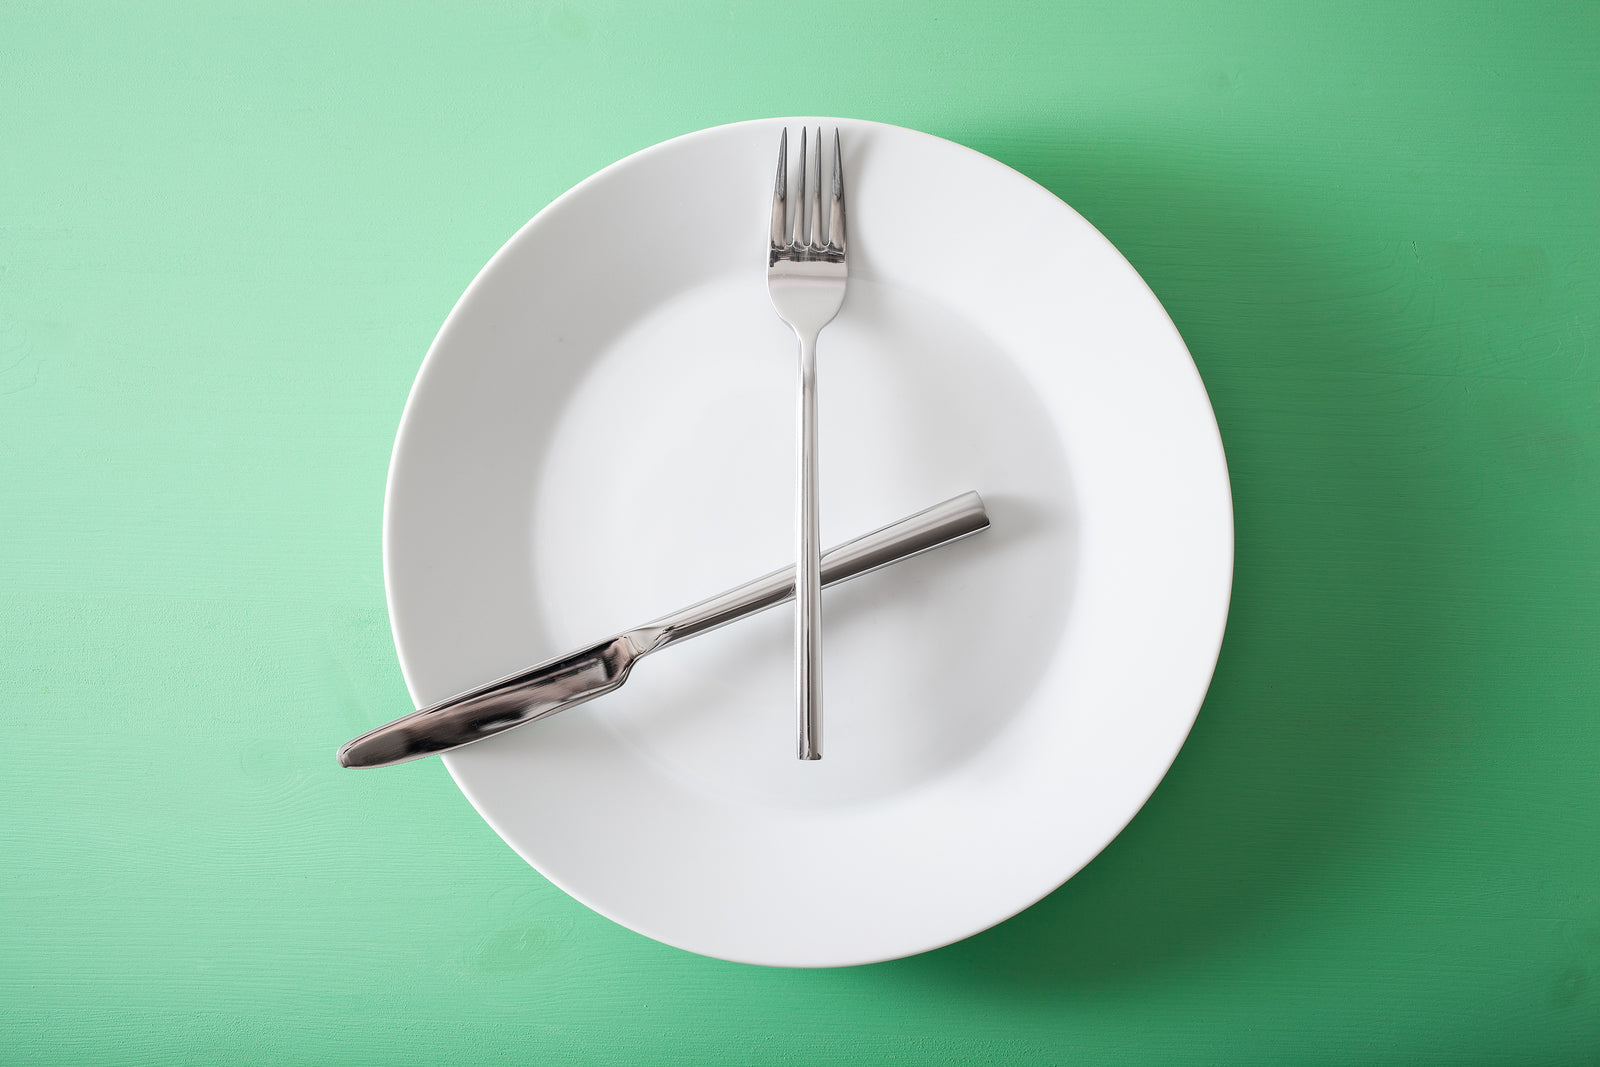 A plate with a knife and fork in the shape of a clock to signify intermittent fasting